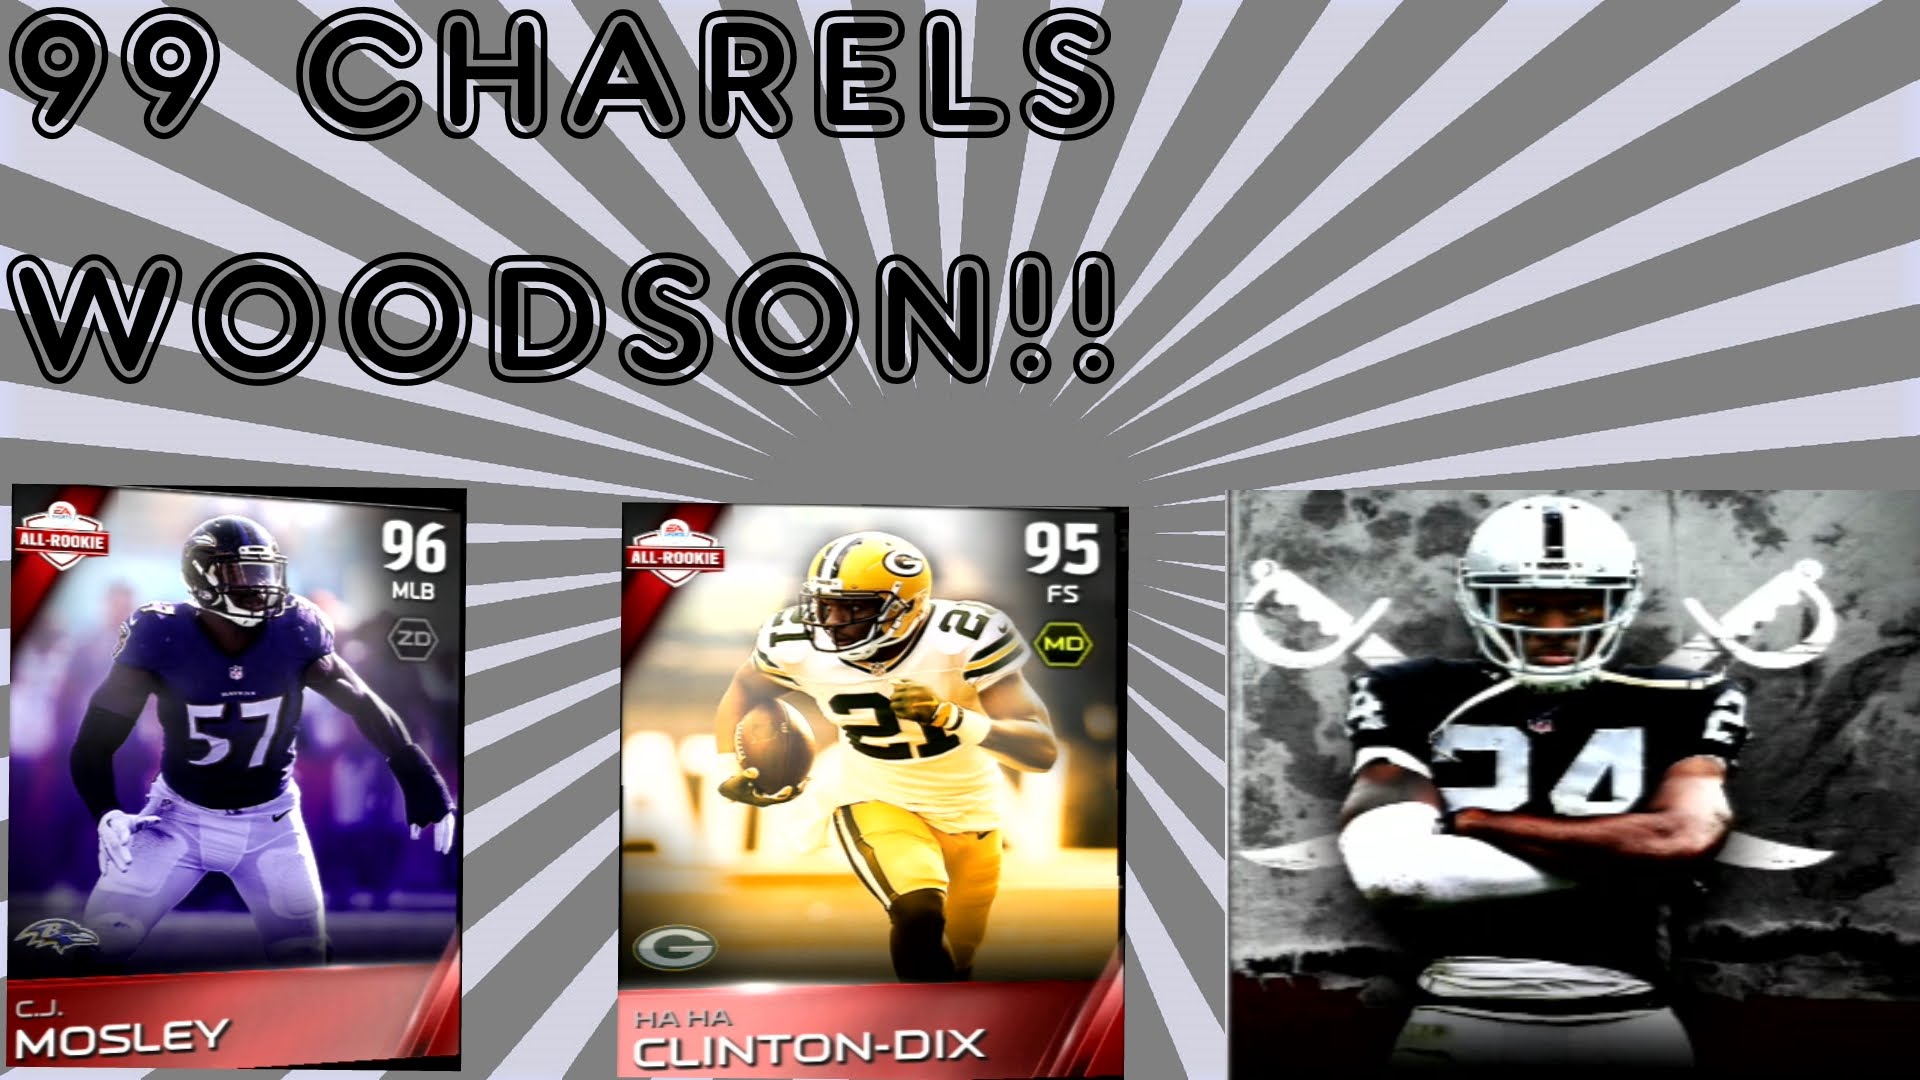 99 CHARLES WOODSON !! :: MADDEN 15 ULTIMATE TEAM PS3 - YouTube